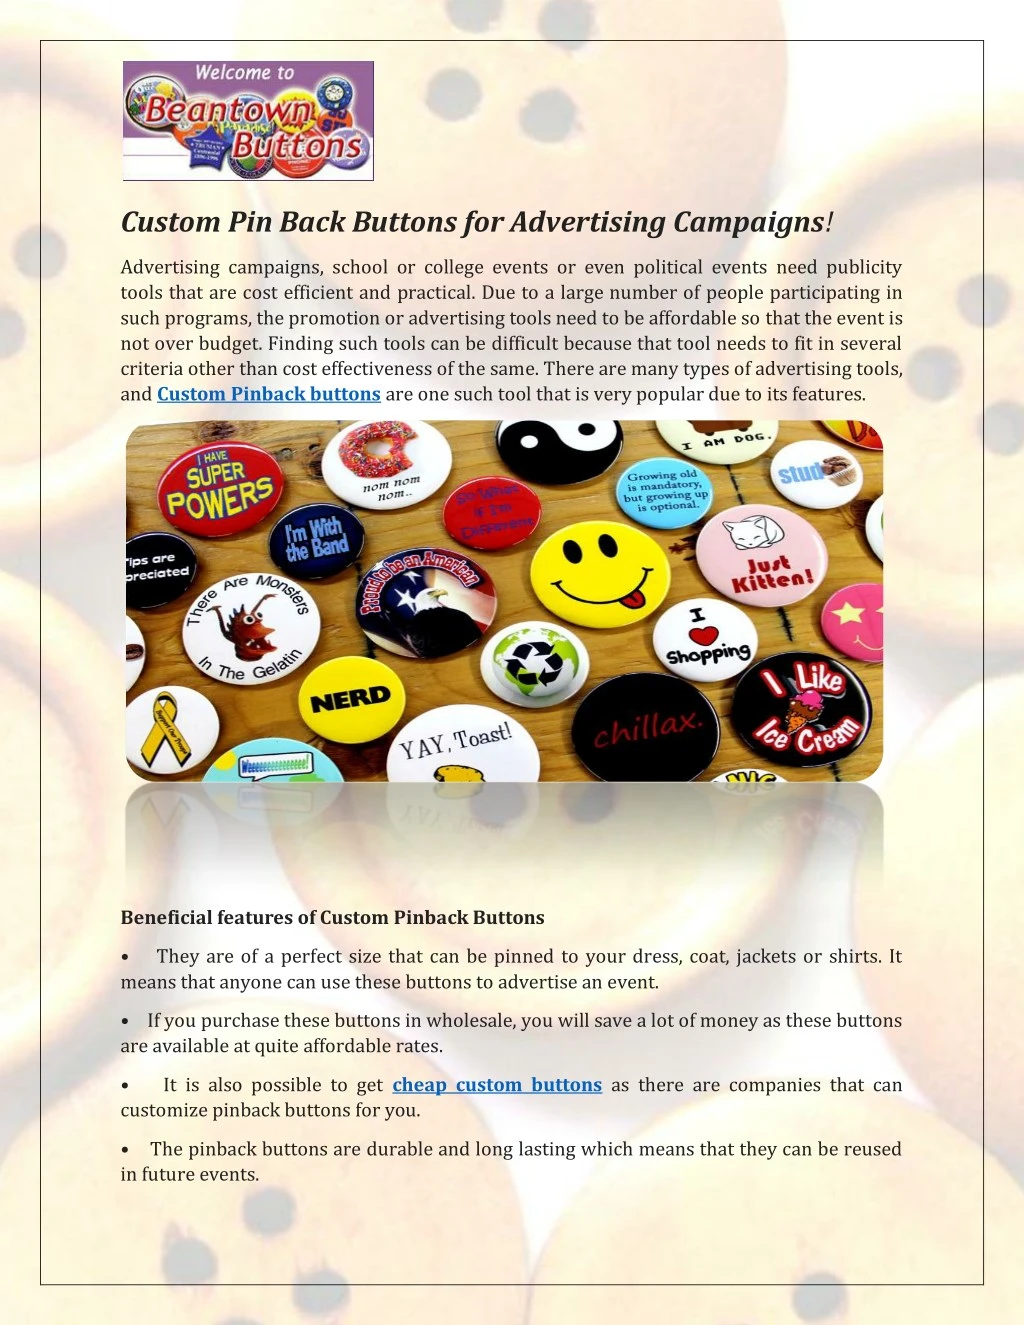 custom pin back buttons for advertising campaigns